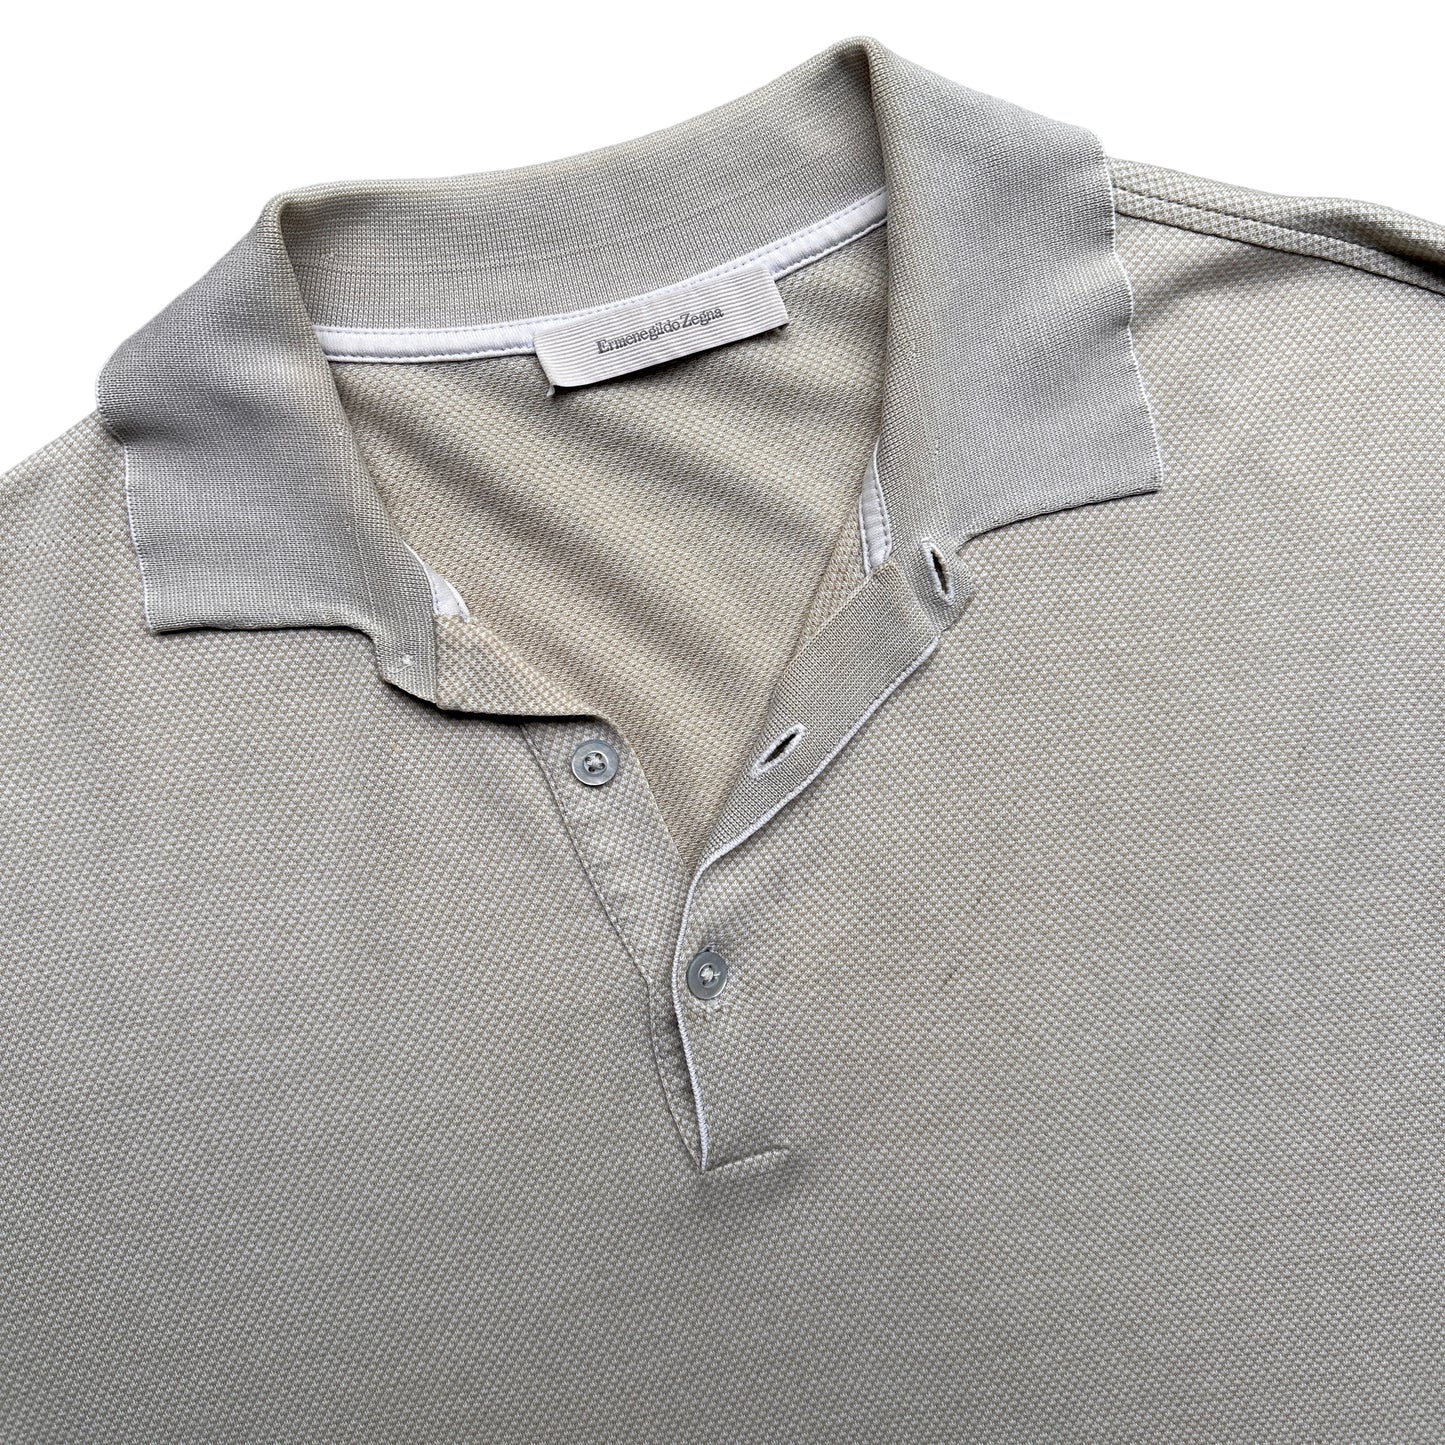 Zegna Made in italy🇮🇹 cotton polo large fit